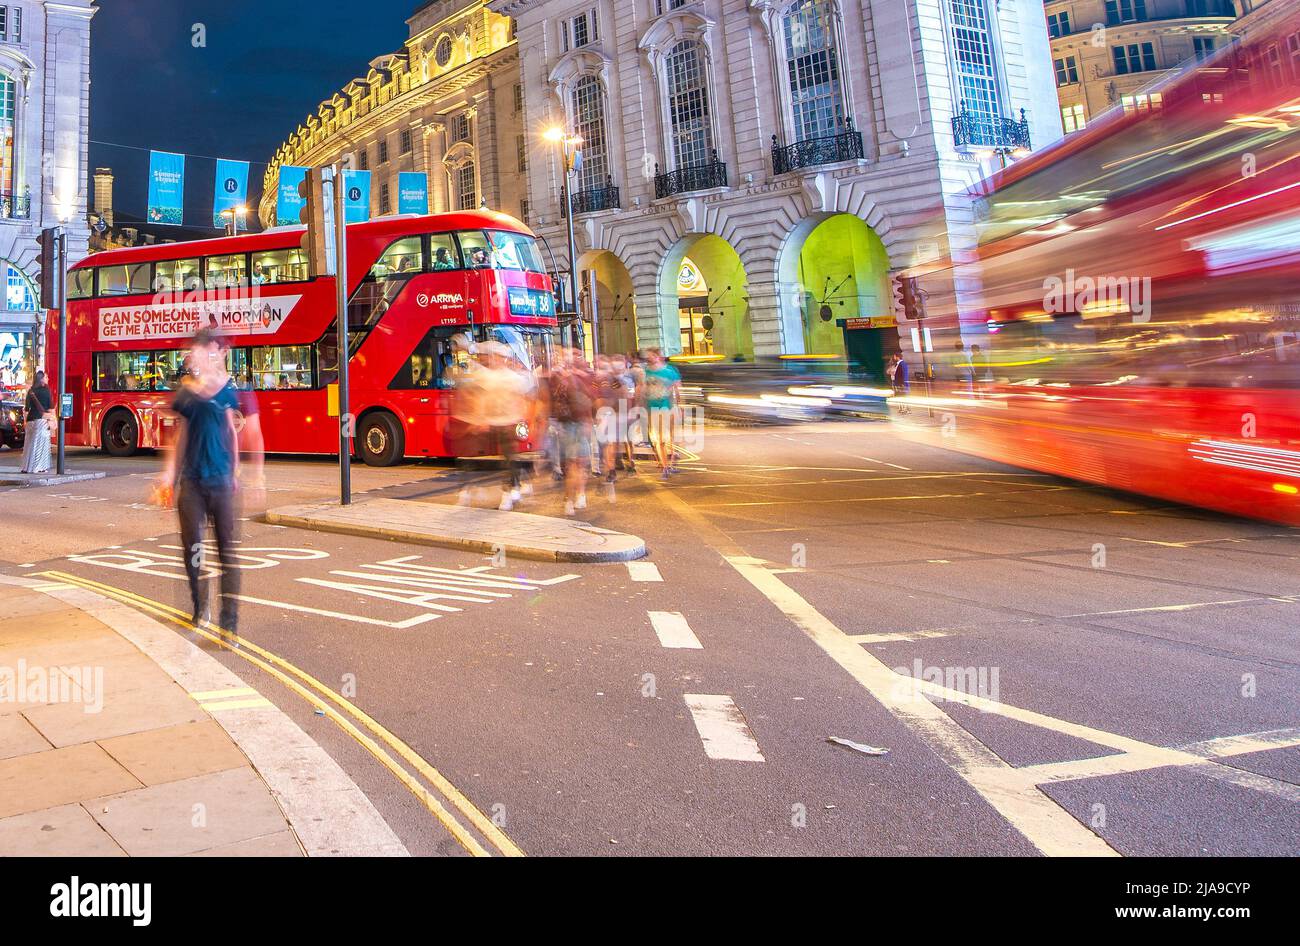 LONDON, UK - JULY 3RD, 2015: Red Double Decker bus speeds up at night in Piccadilly Circus Stock Photo